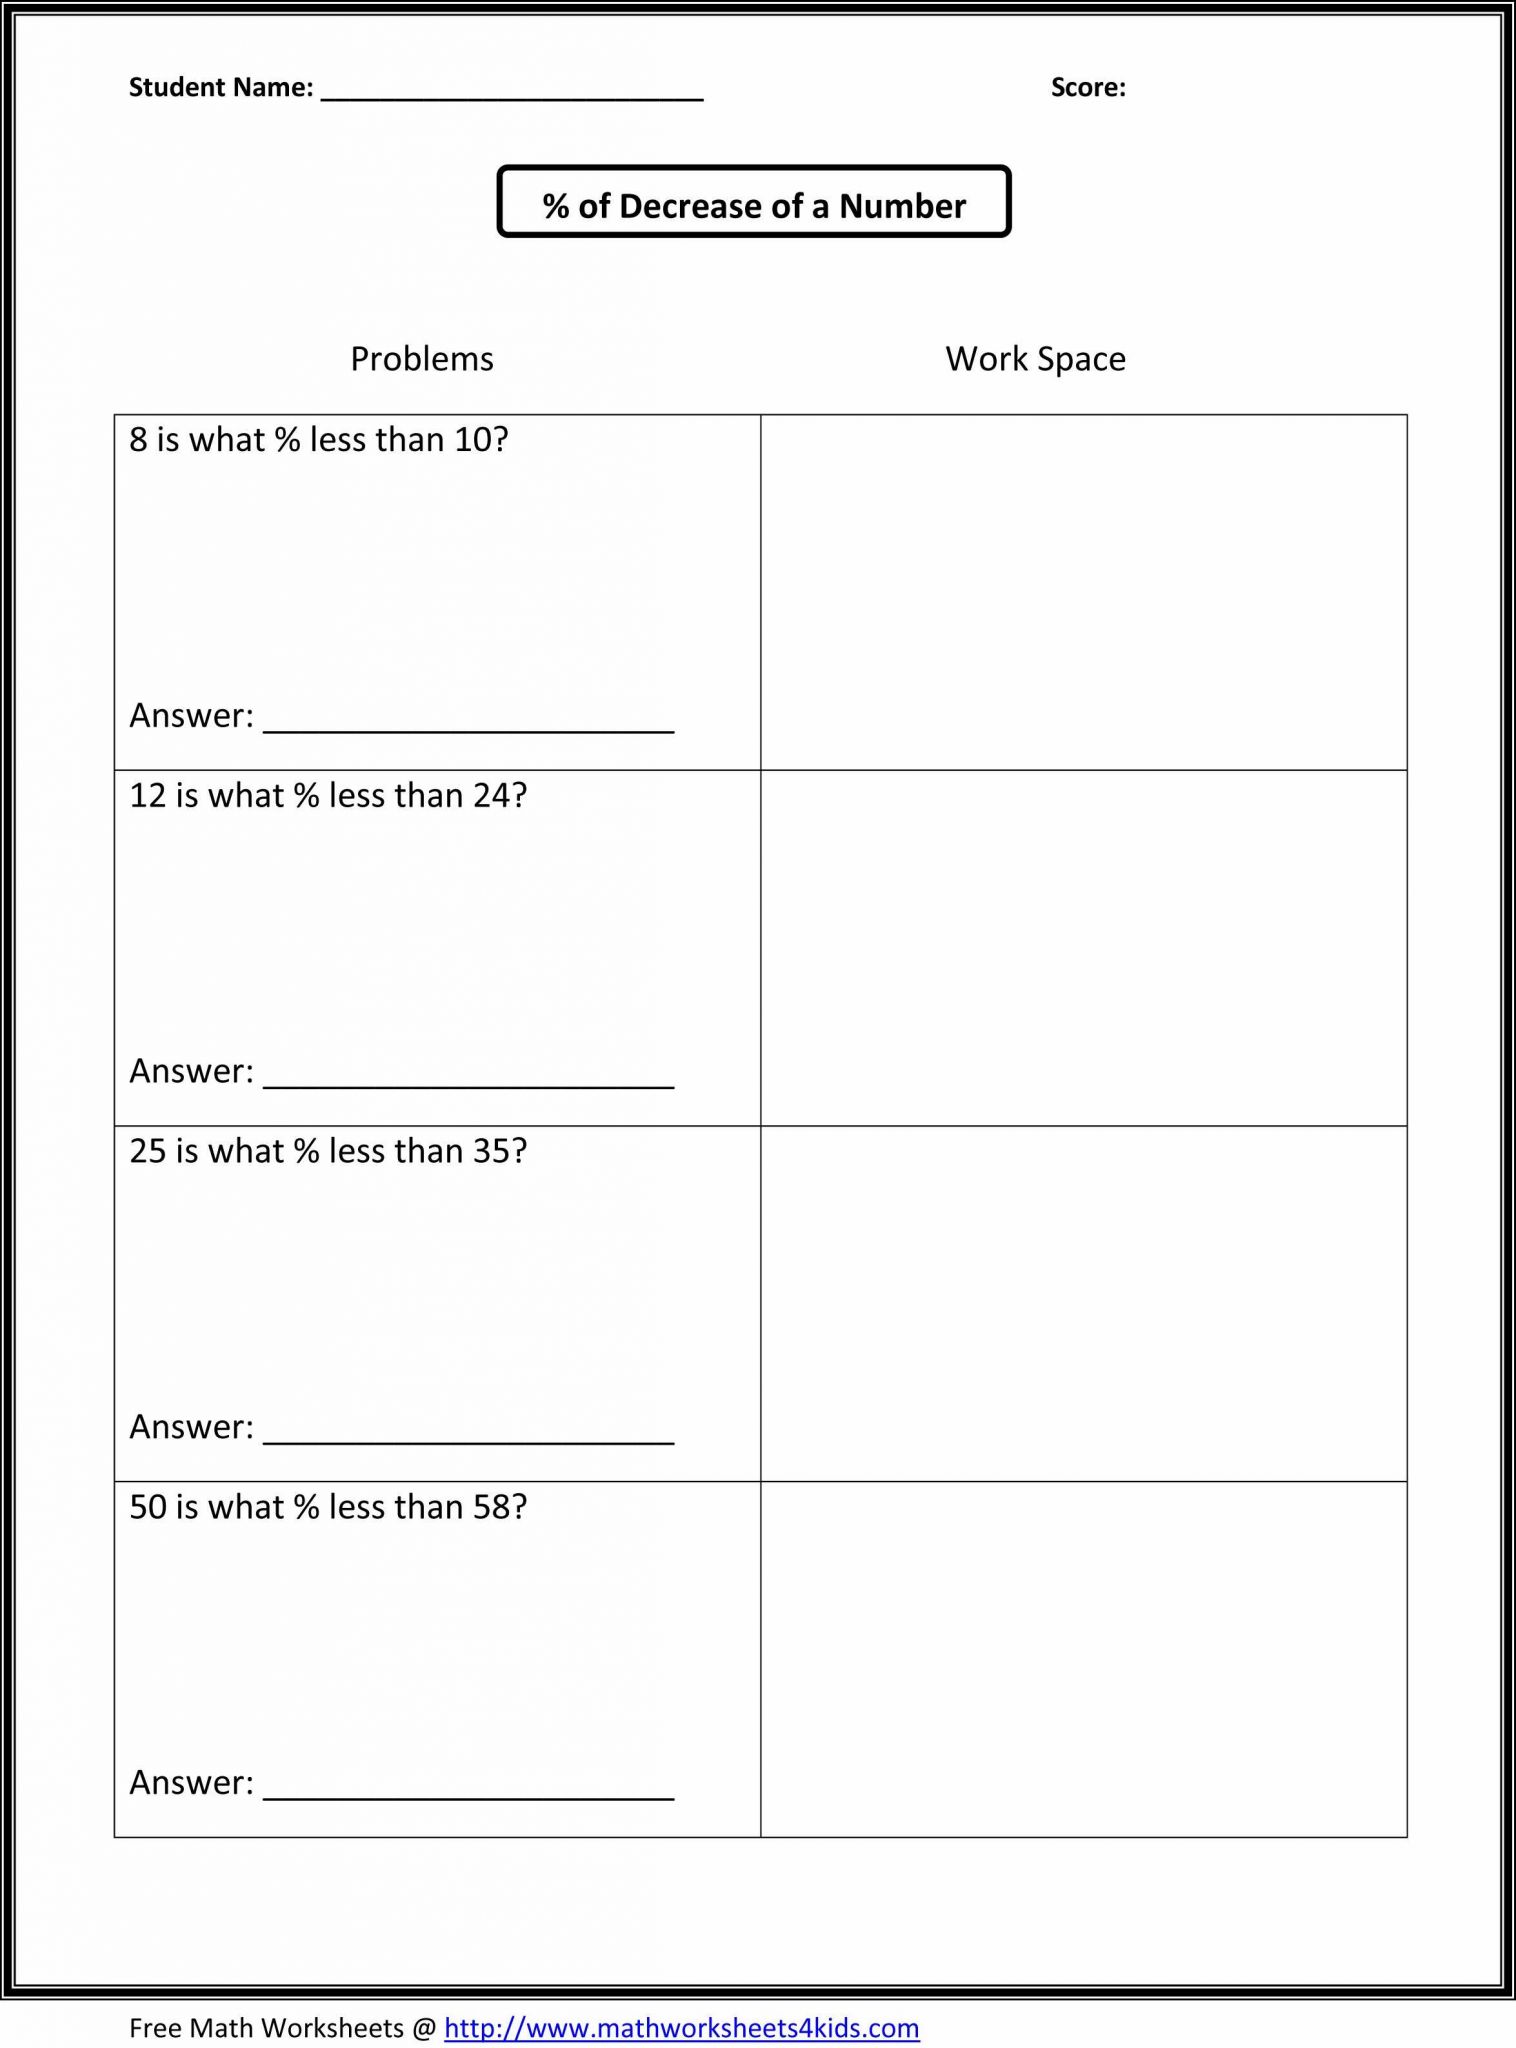 7th Grade Math Worksheets and Answer Key and Printables Free Integer Word Problems Worksheet 7th Grade Math